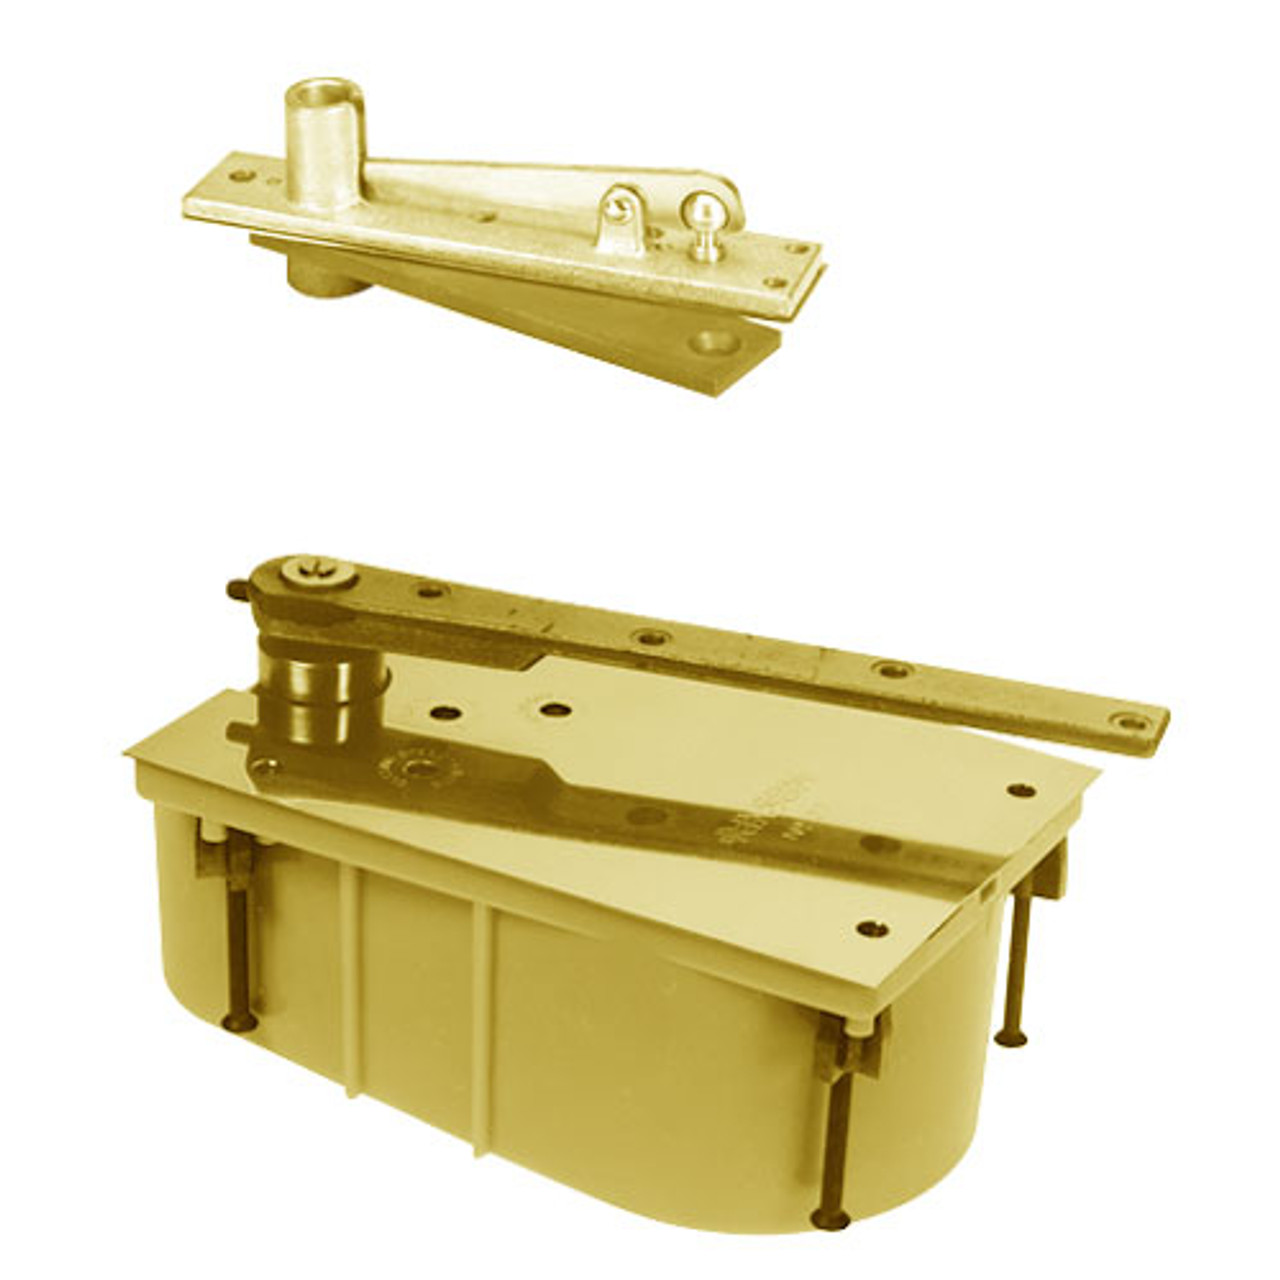 28-105S-554-LFP-CWF-RH-605 Rixson 28 Series Heavy Duty Single Acting Center Hung Floor Closer with Concealed Arm in Bright Brass Finish